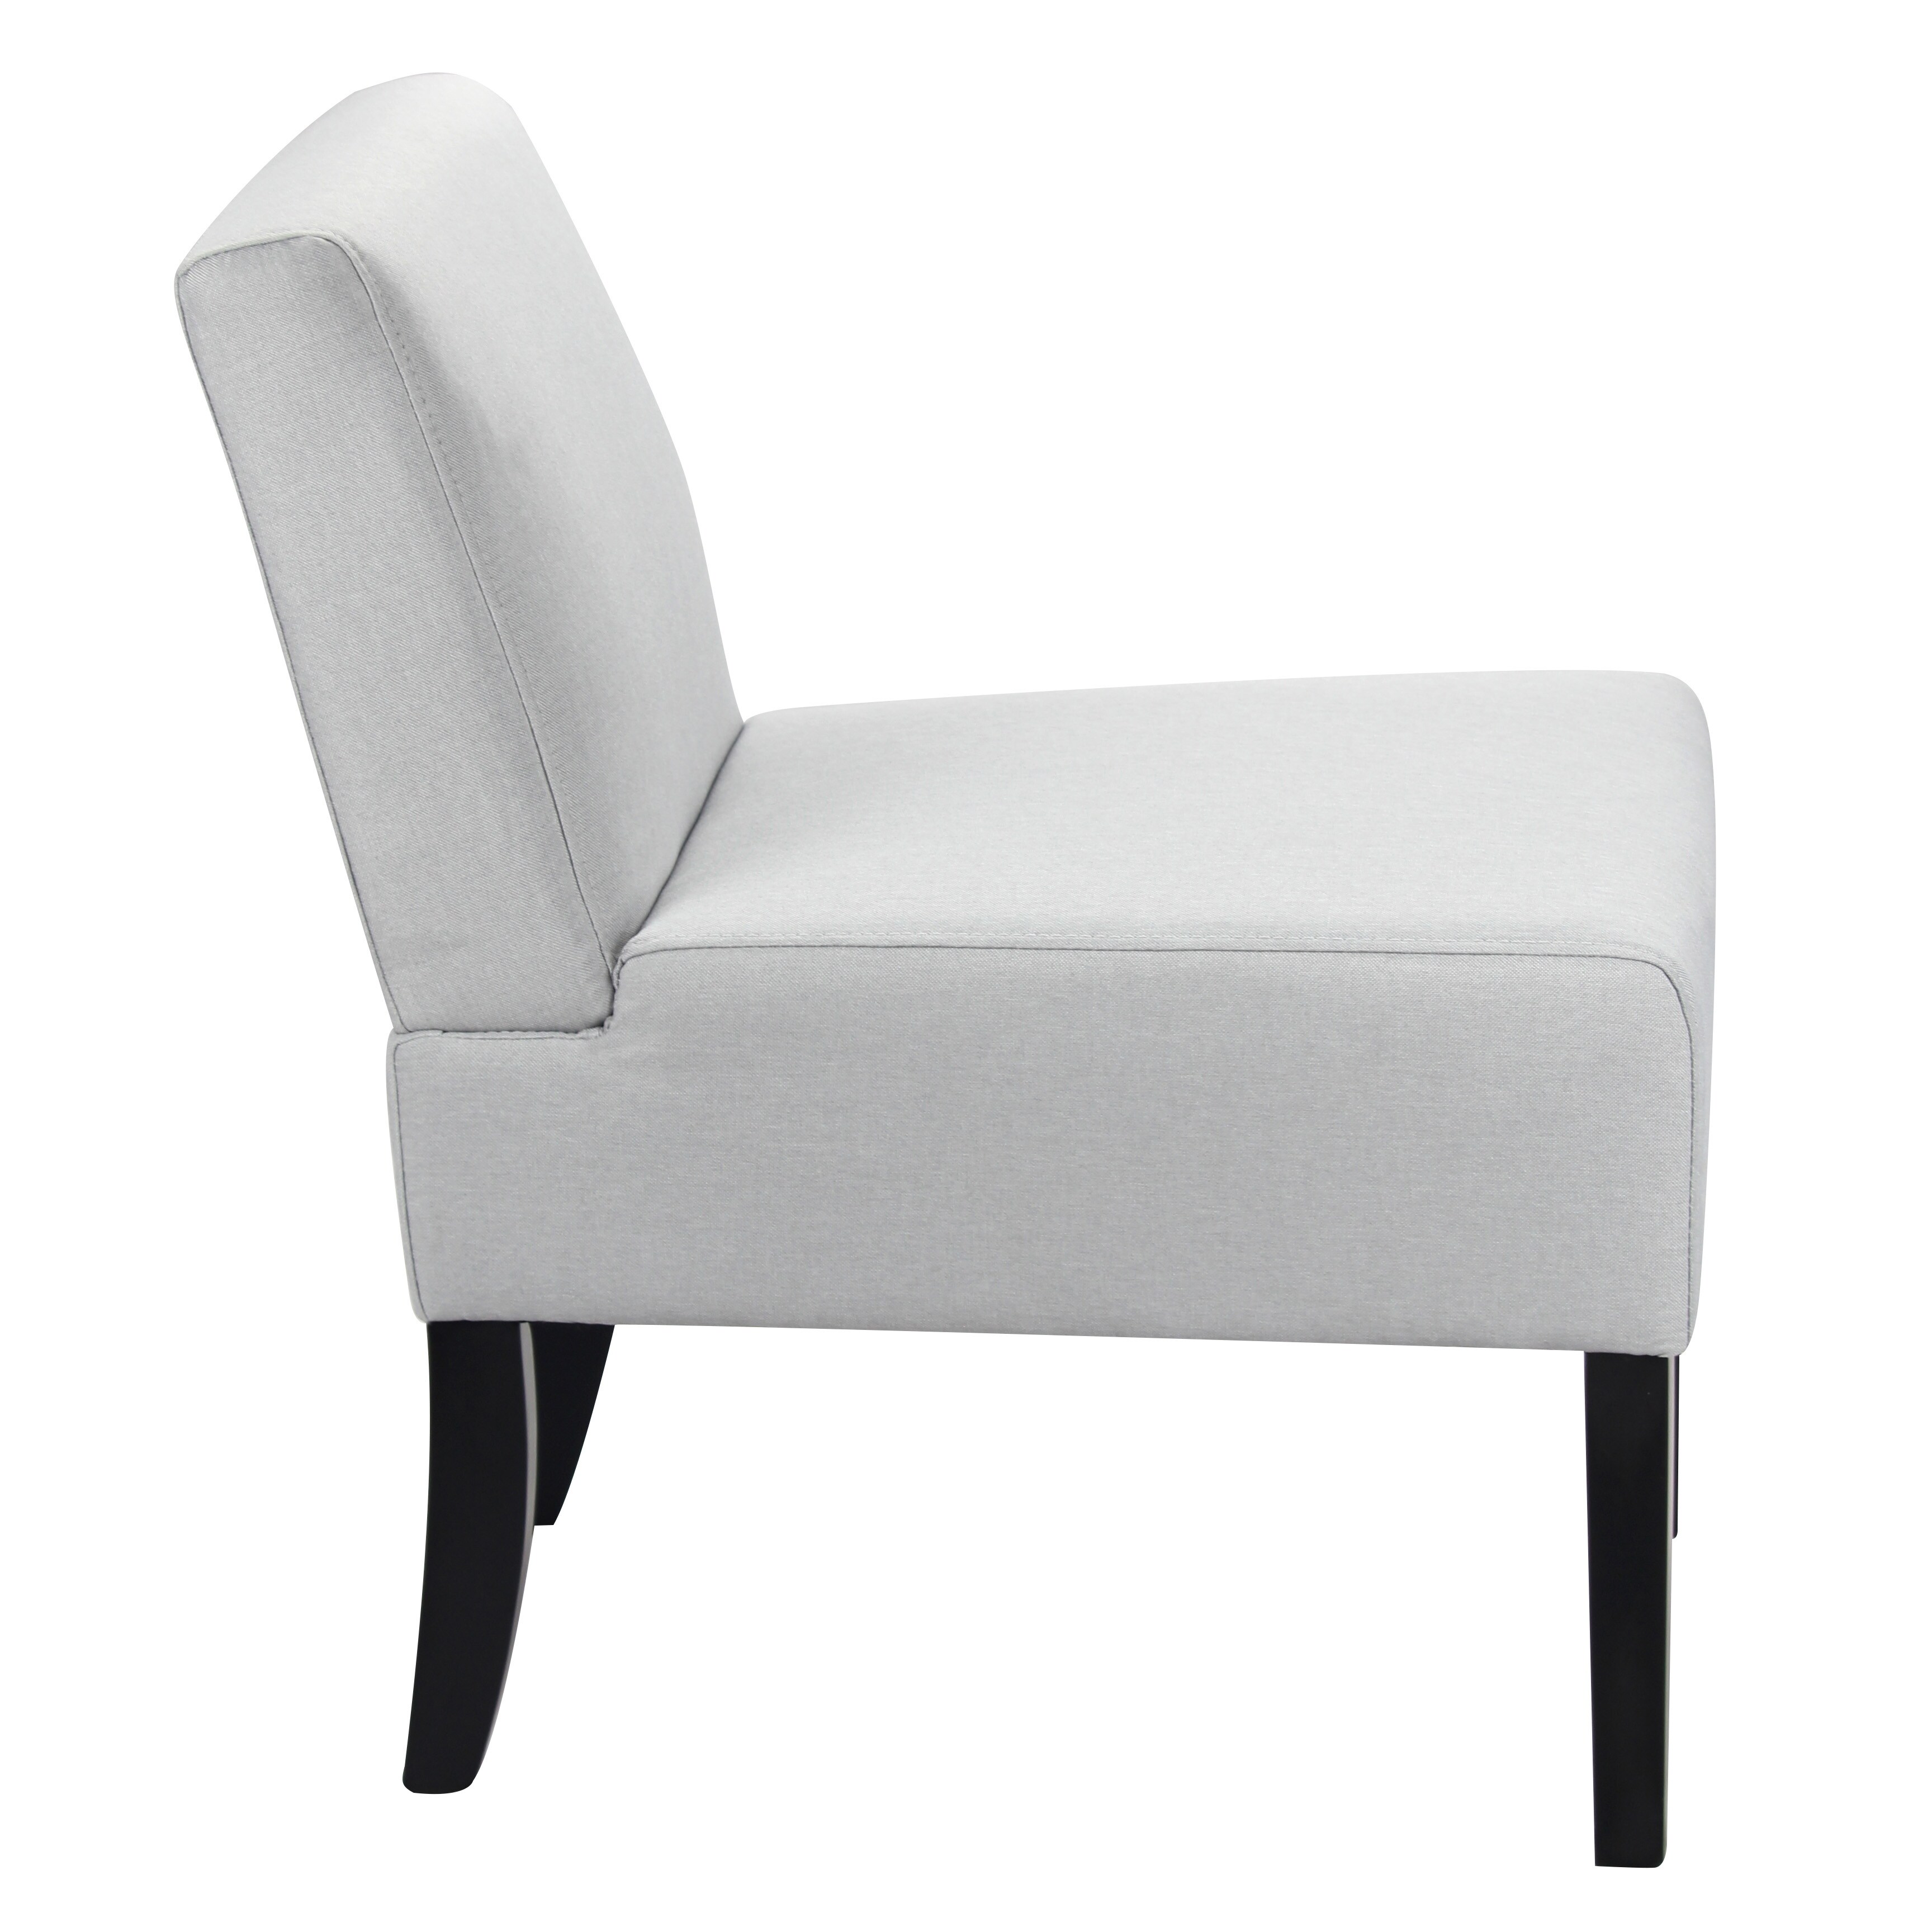 Porthos Home Contemporary Style Low Back Armless Accent Chair | eBay